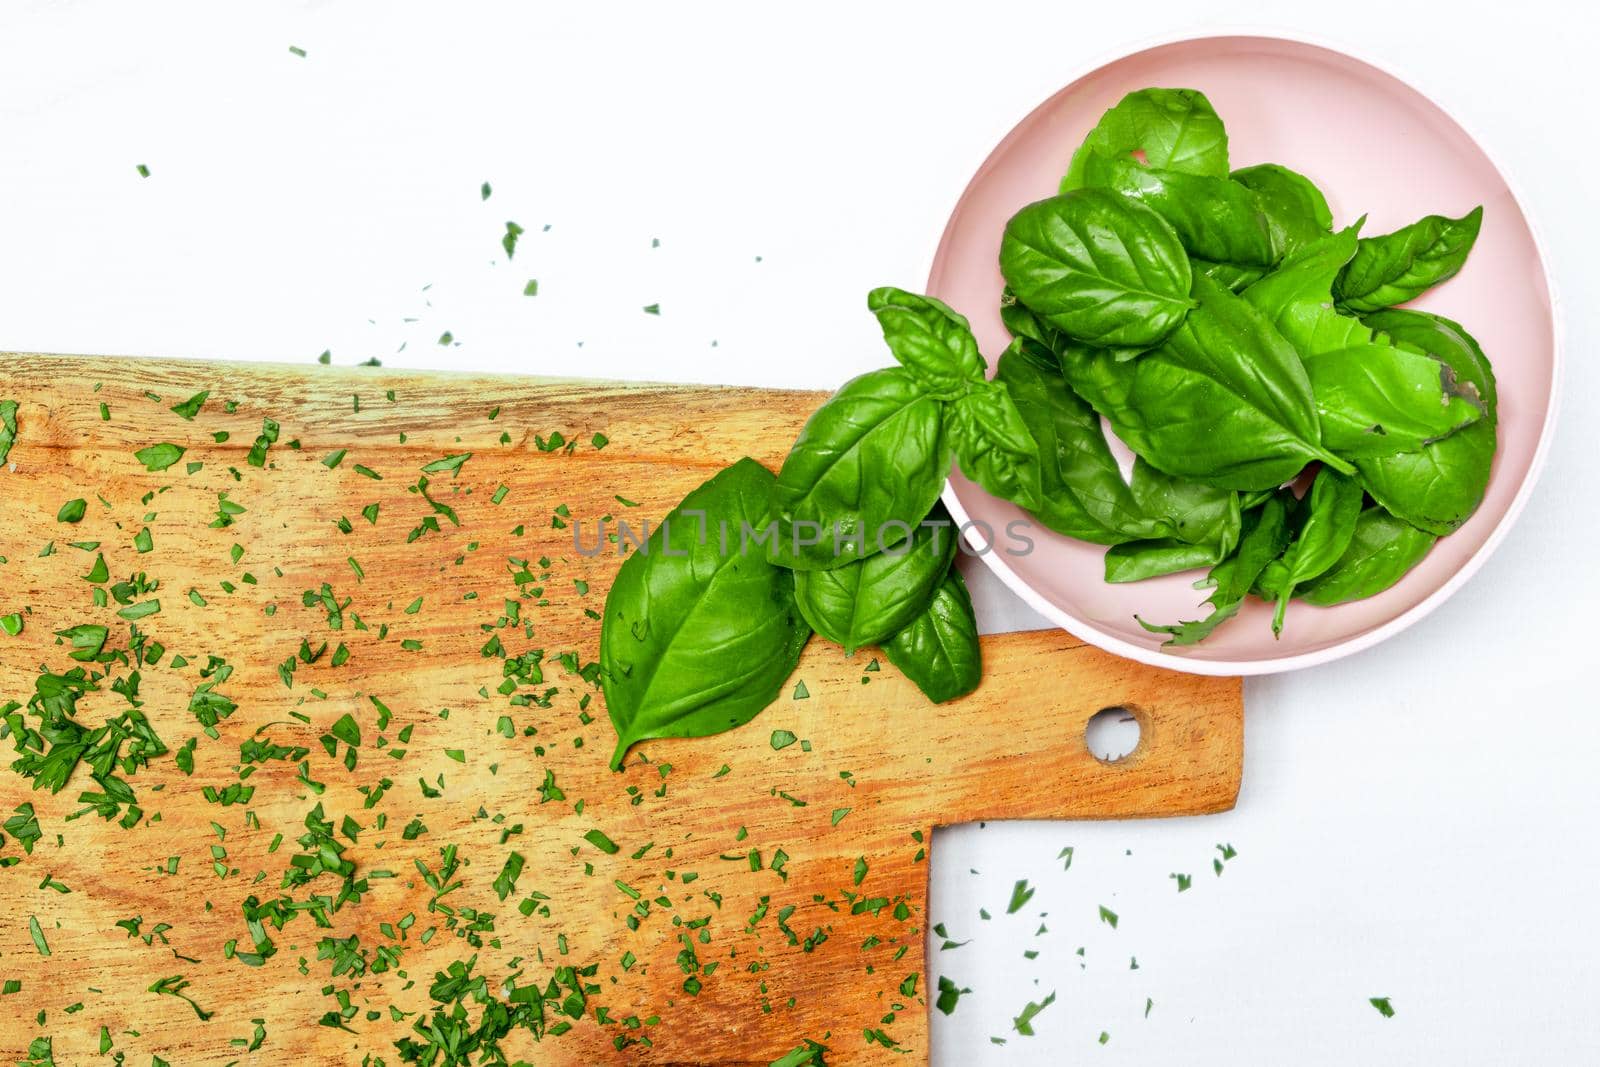 Fresh basil leaves in a small bowl next to a wooden cutting board on a white surface. Fresh, healthy and natural food concept. Copy space.